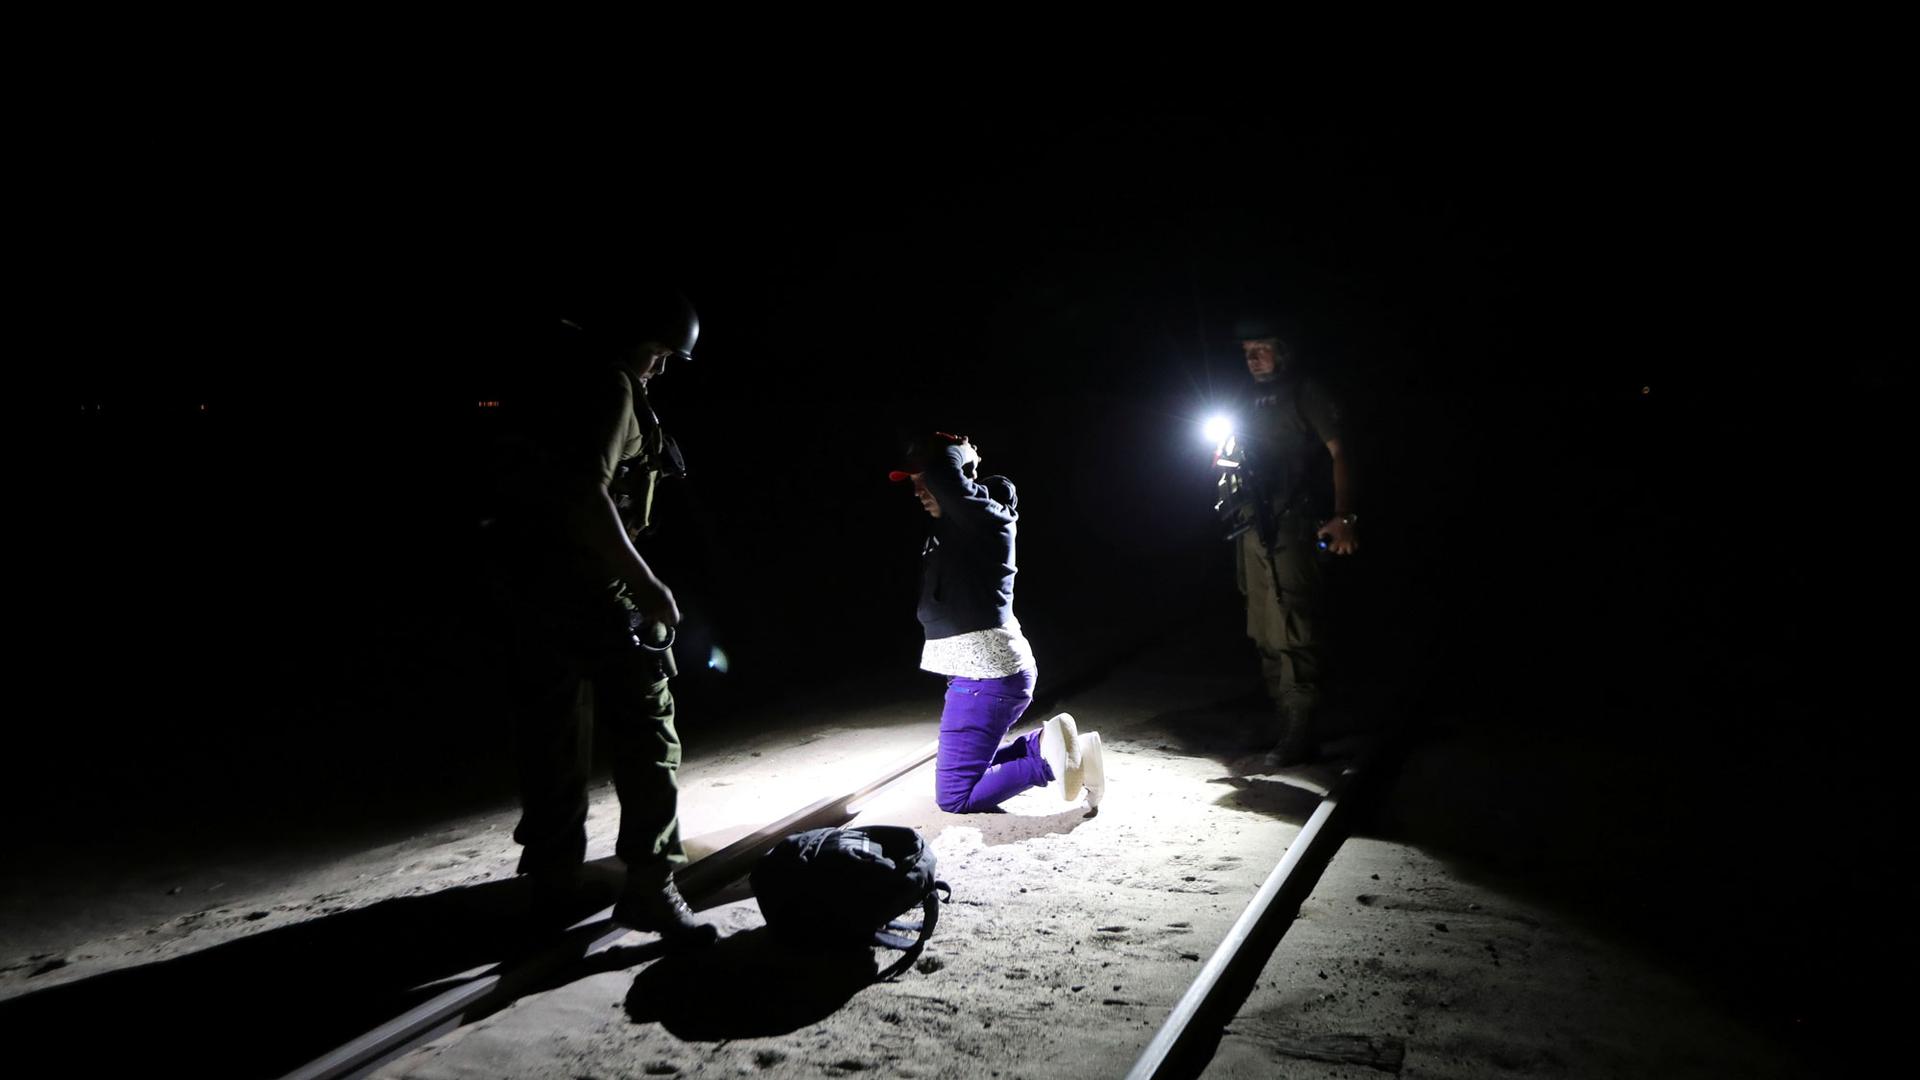 Migrant Yoniel Torres is shown wearing purple pants and handcuffed at theChilean and Peruvian border in Arica, Chile.